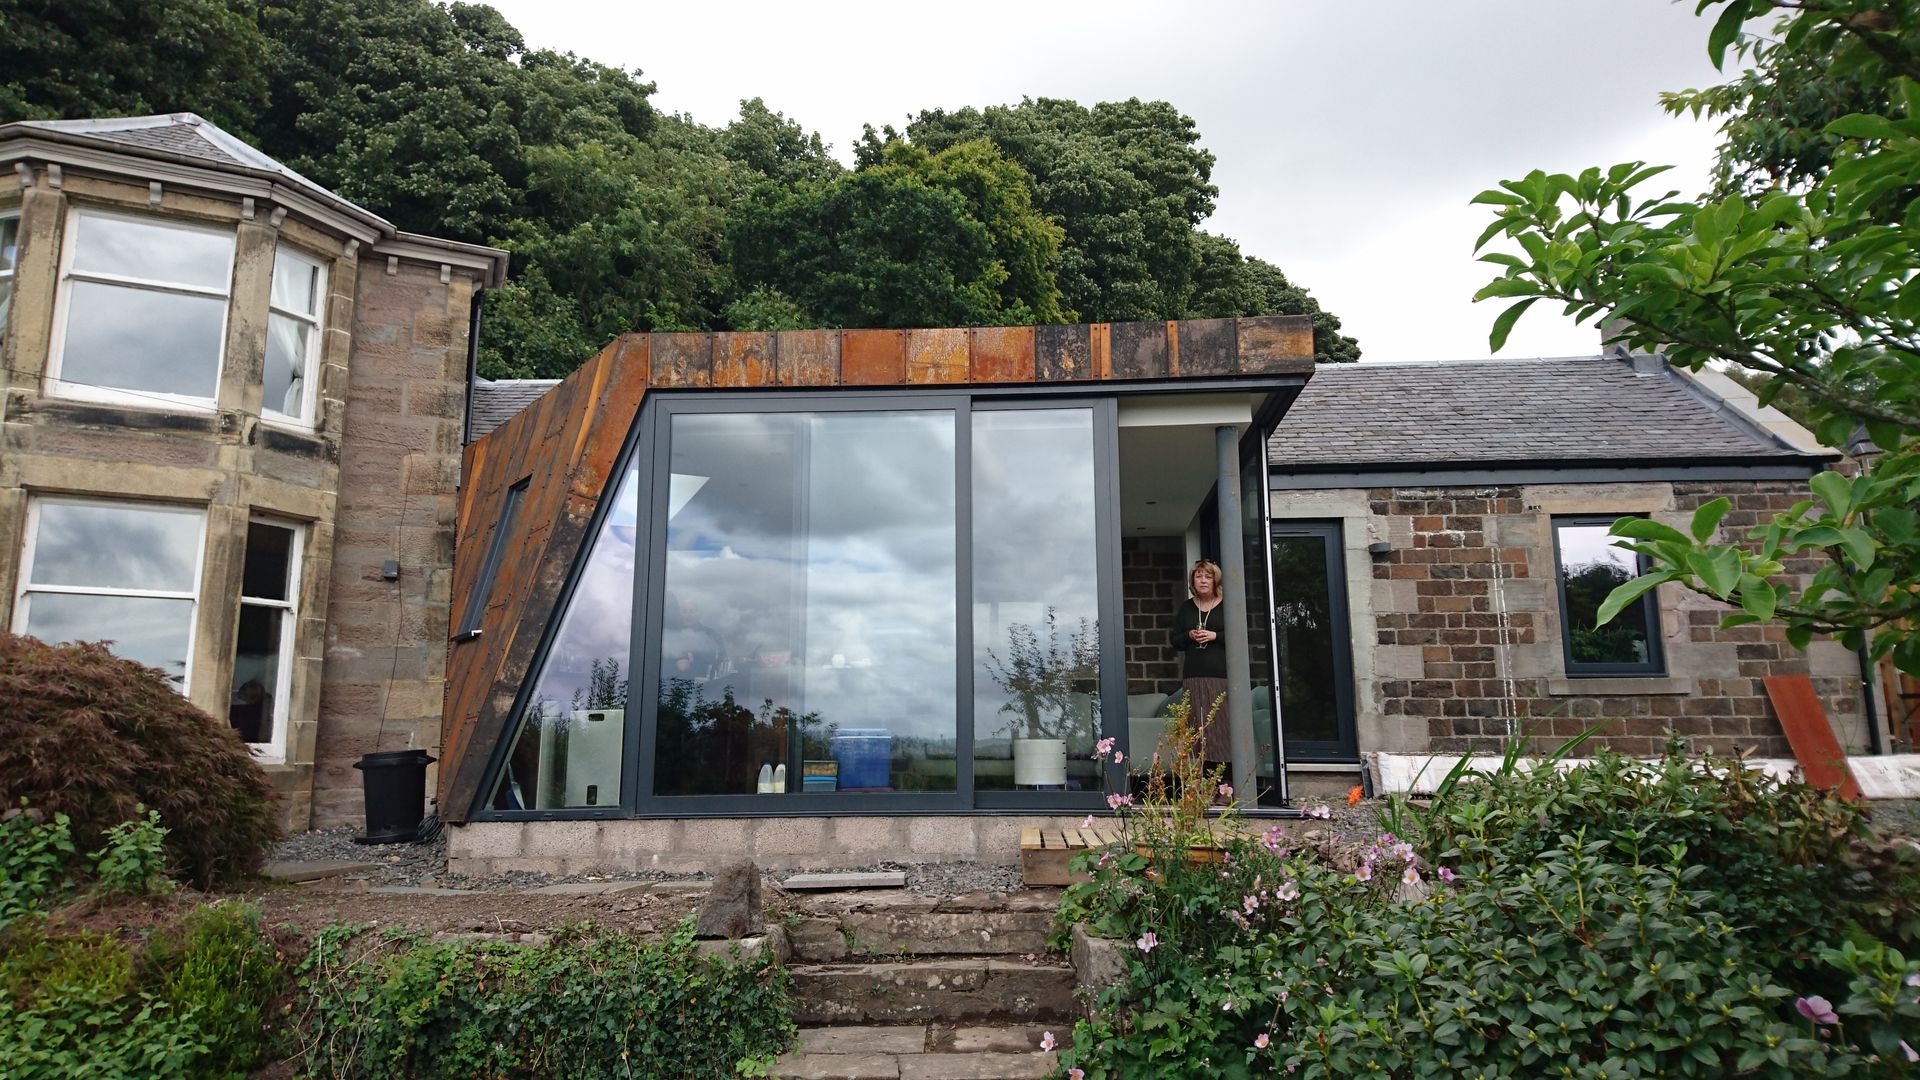 Large sliding doors allow the corner to fold away creating a stronger connection between inside and out. Woodside Parker Kirk Architects Дома в стиле модерн Железо / Сталь Glass sliding doors,Corten steel cladding,extension,old meets new,Garden,Extension